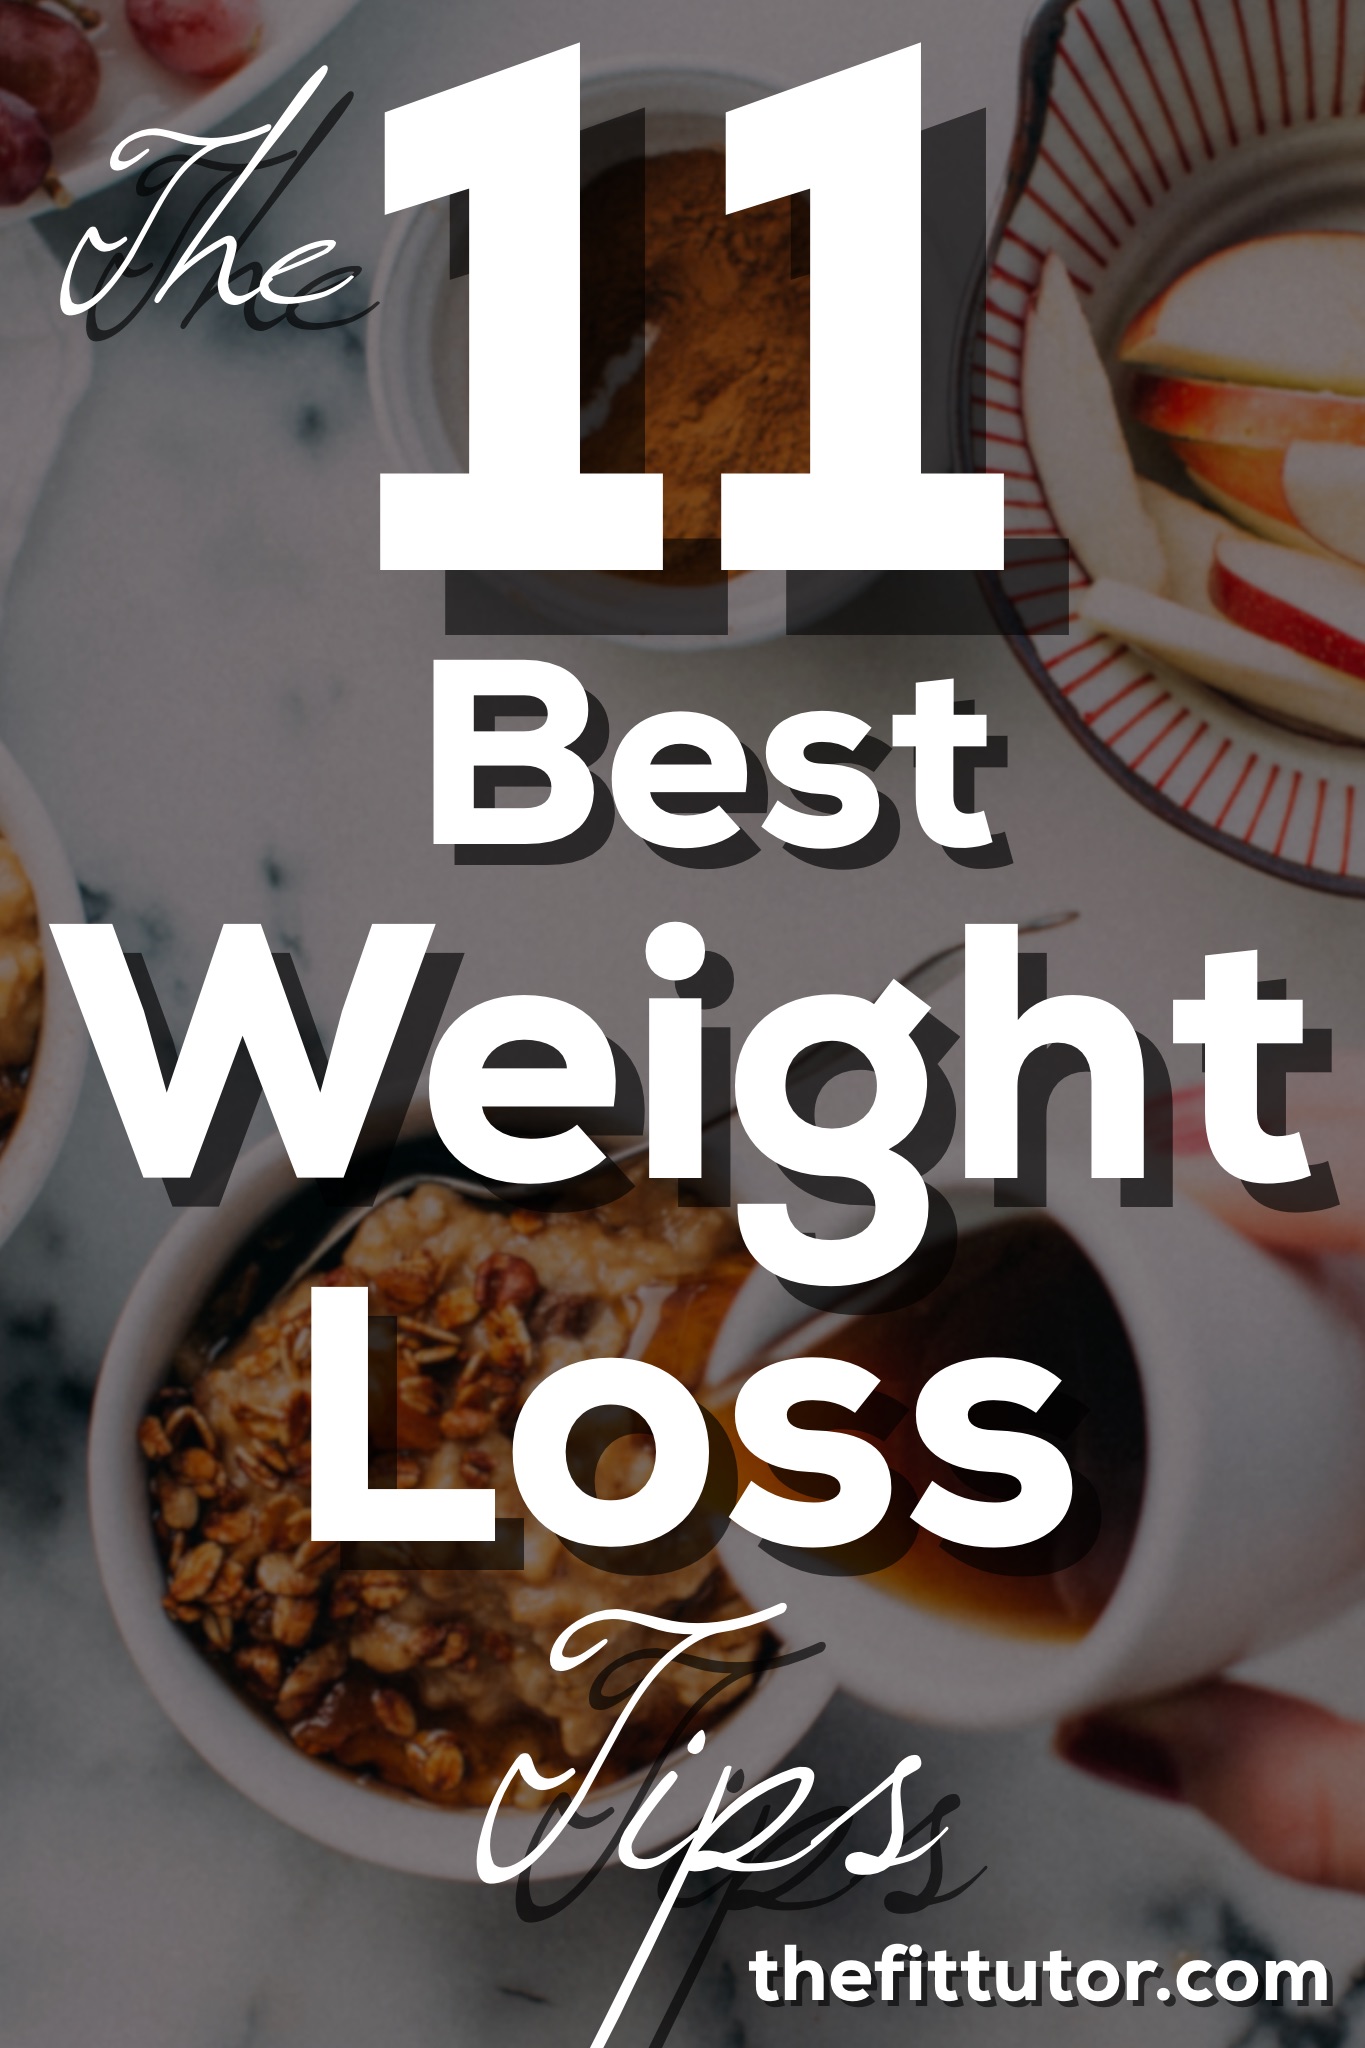 Check out the Top 11 Best Weight Loss Tips from a personal trainer and nutrition coach!